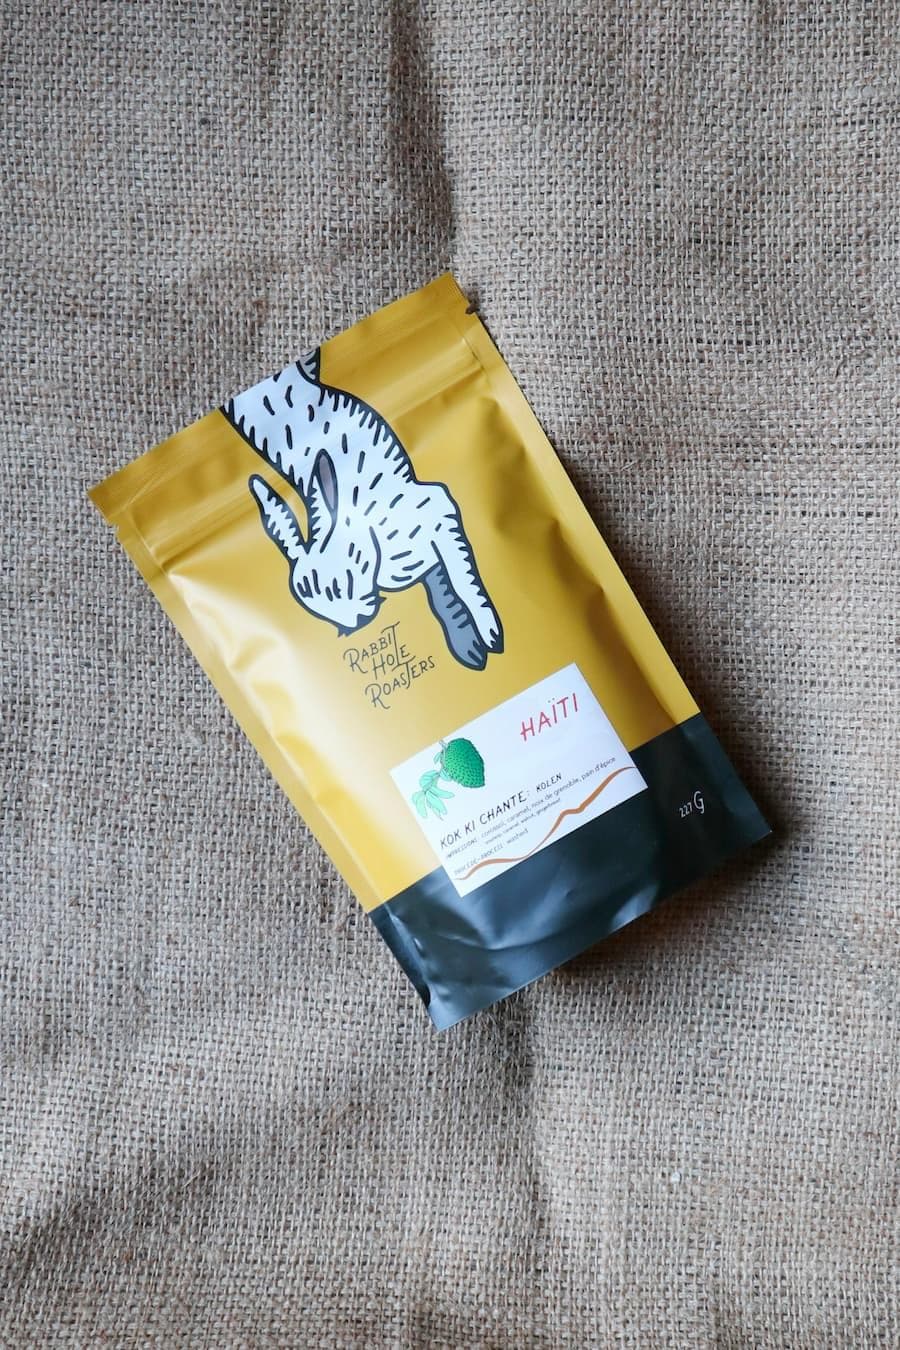 A bag of coffee from Rabbit Hole Roasters.